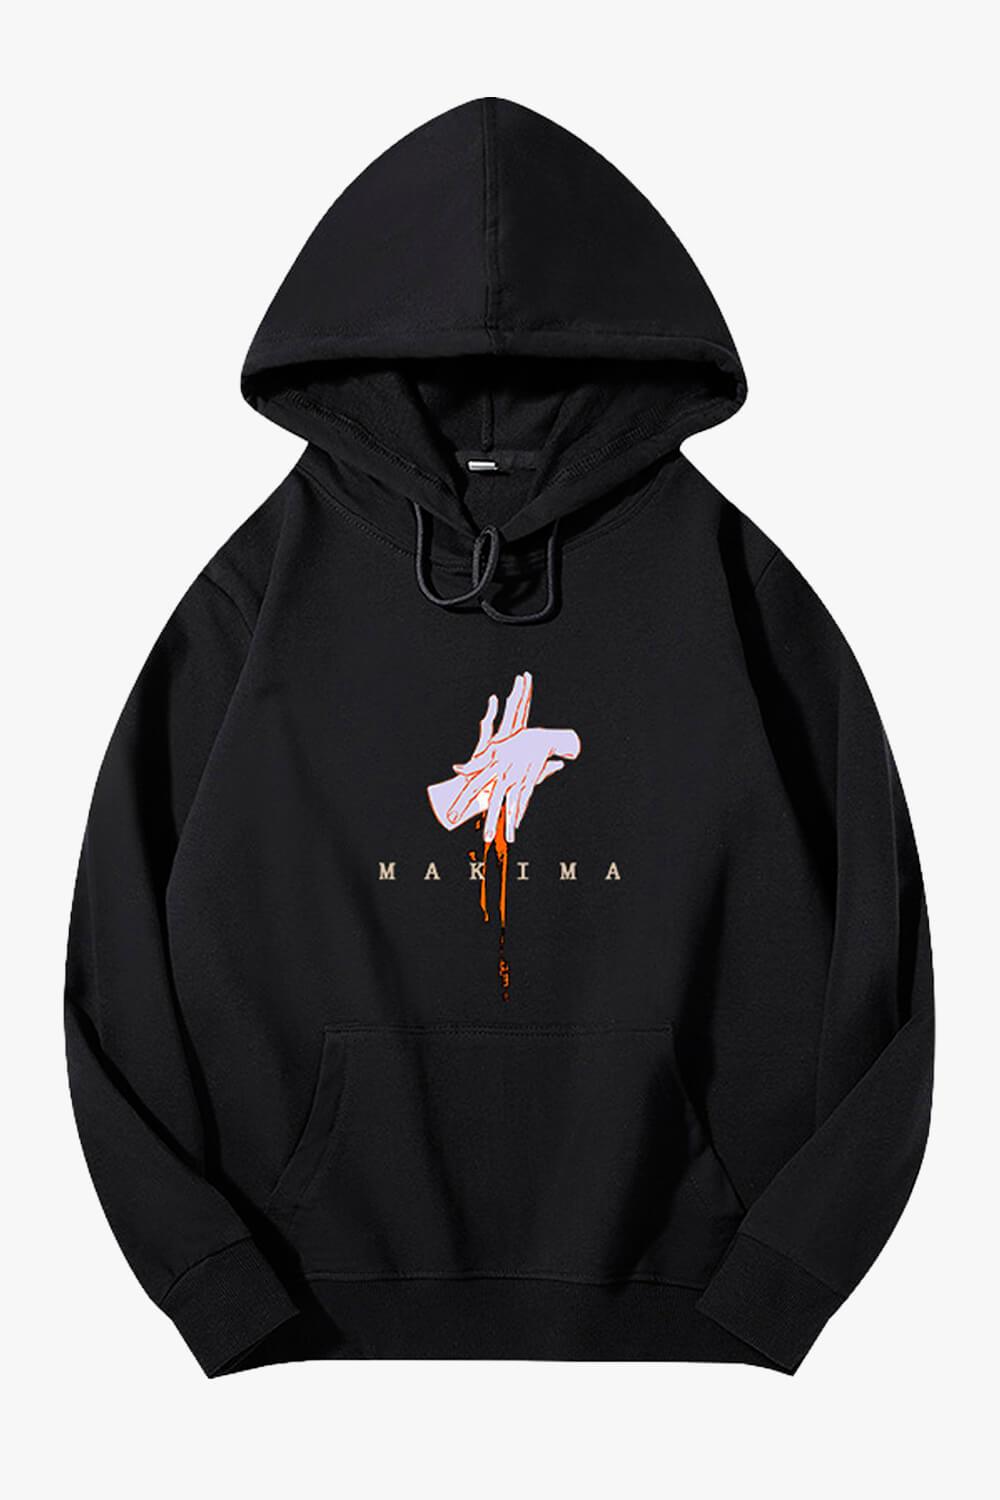 Makima Hand Sign Chainsaw Man Hoodie - Aesthetic Clothes Shop